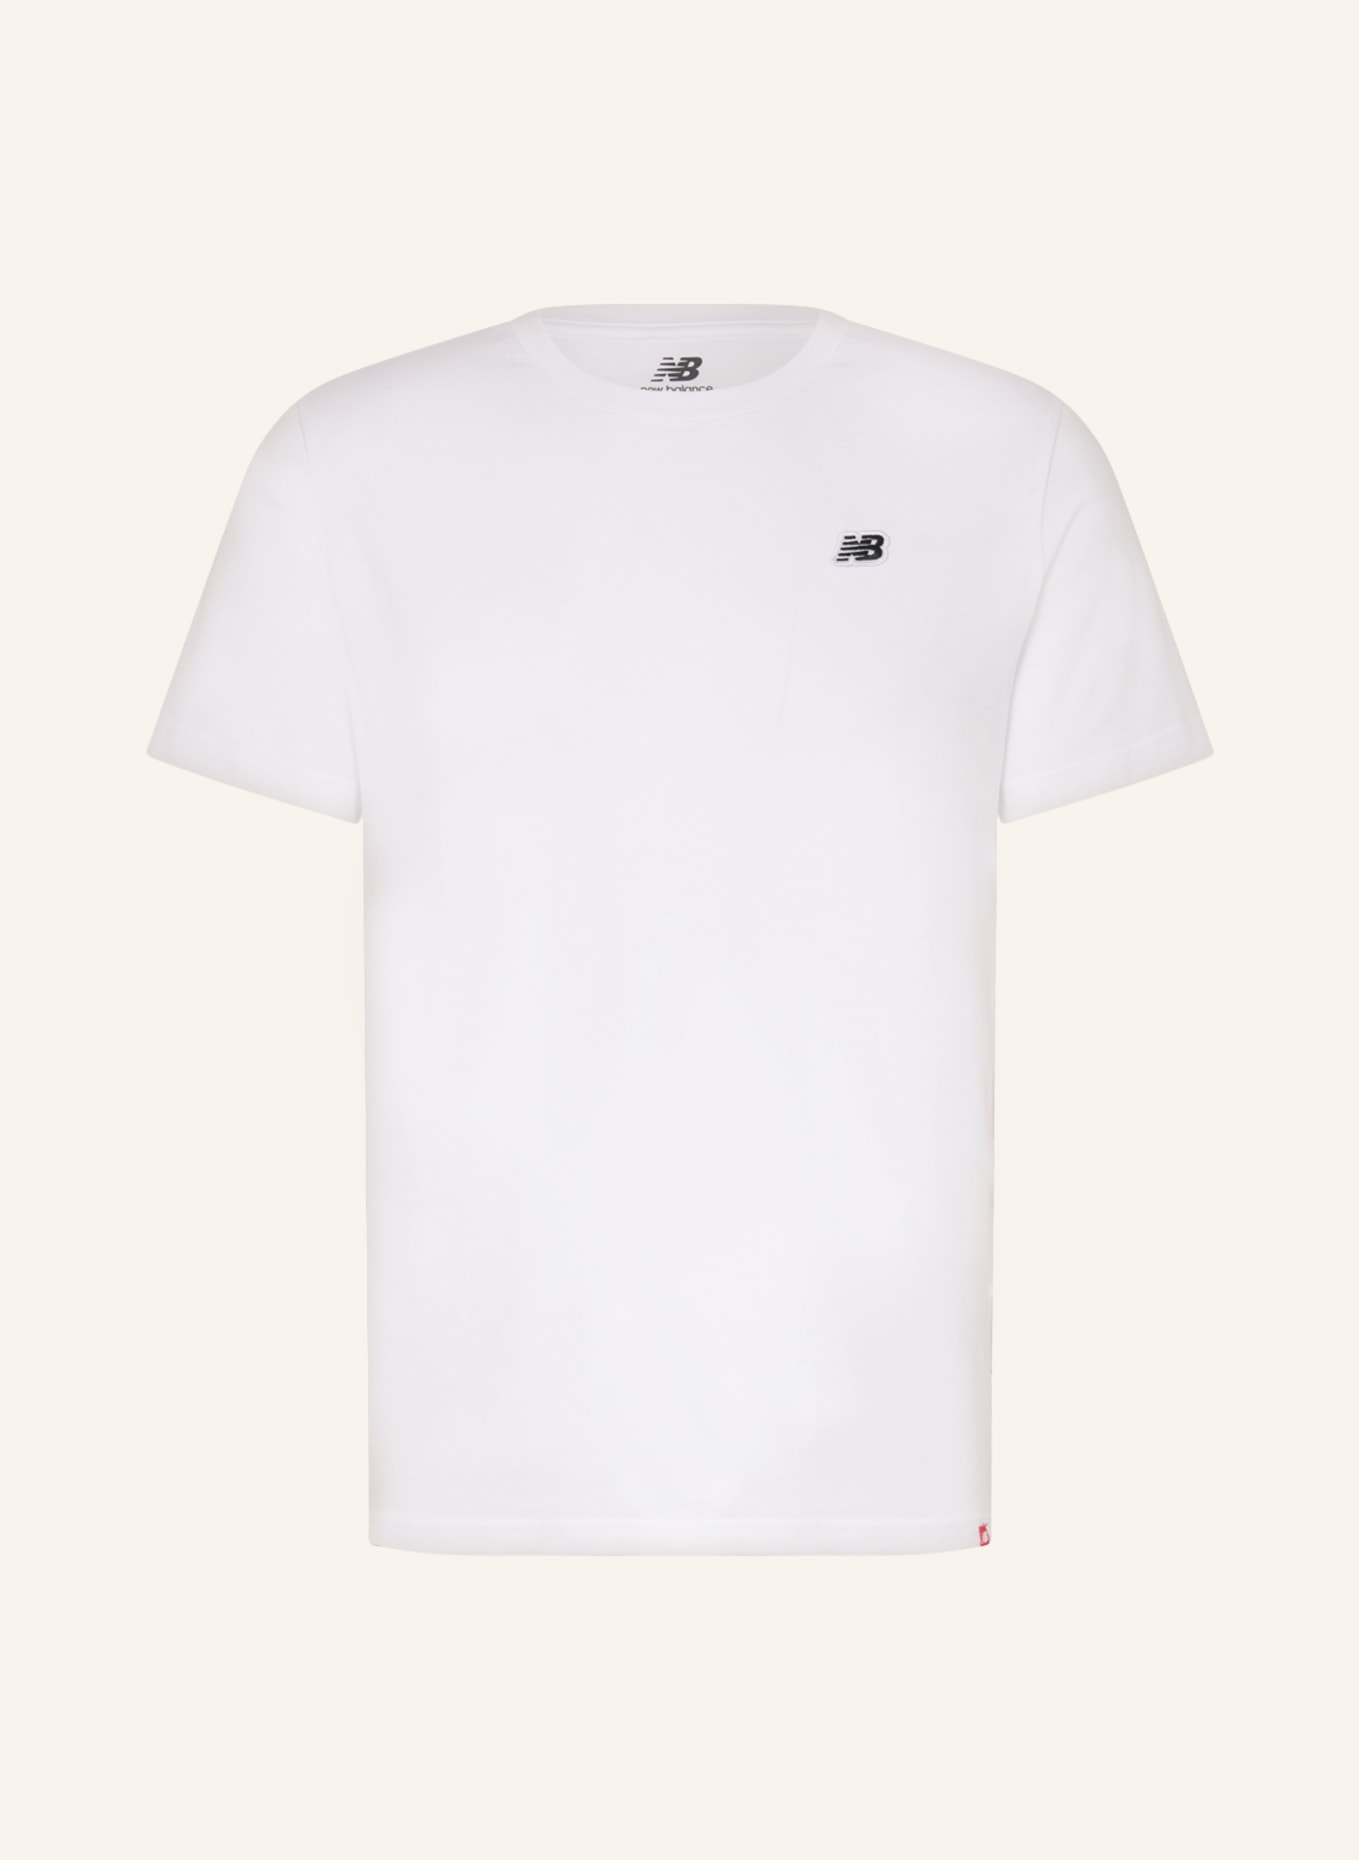 new balance T-shirt NB SMALL in white